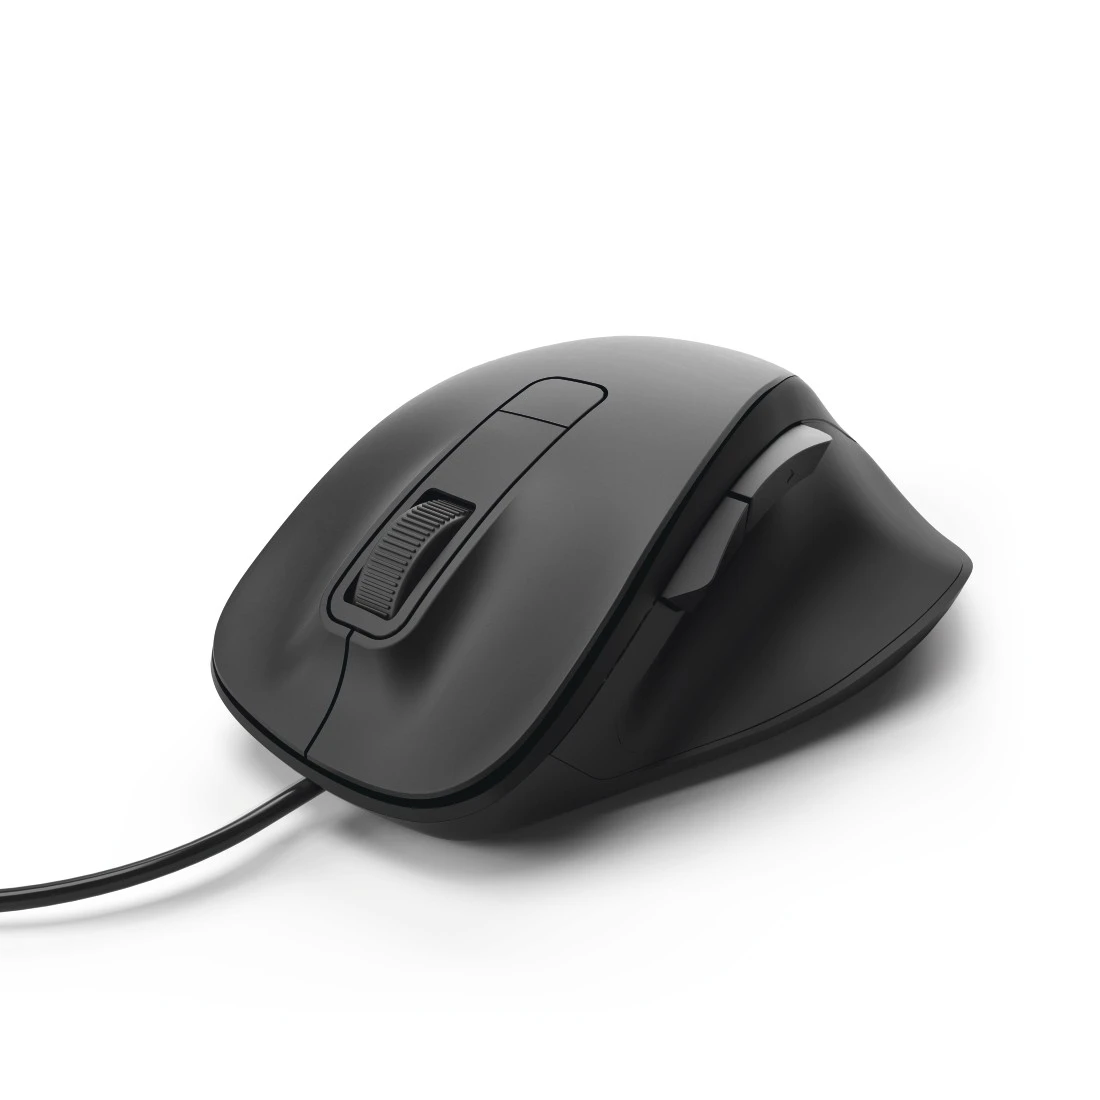 You Recently Viewed Hama 00182612 MC-500 Optical 6-Button Mouse, Cabled, black Image